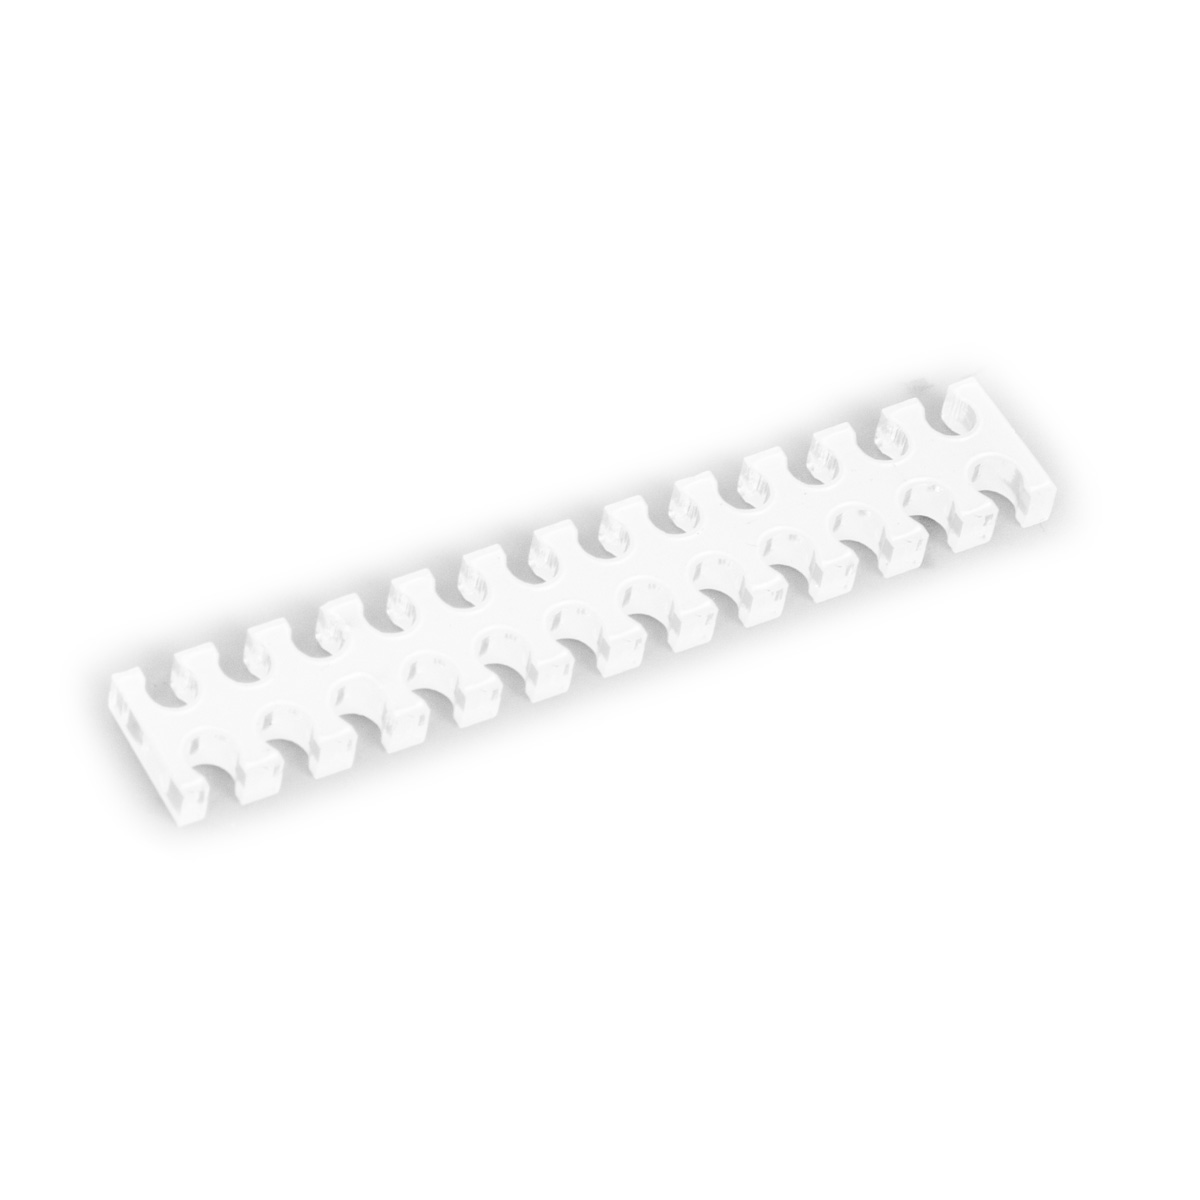 TechForge 24 Slot Cable Comb (Small) 3mm - Clear